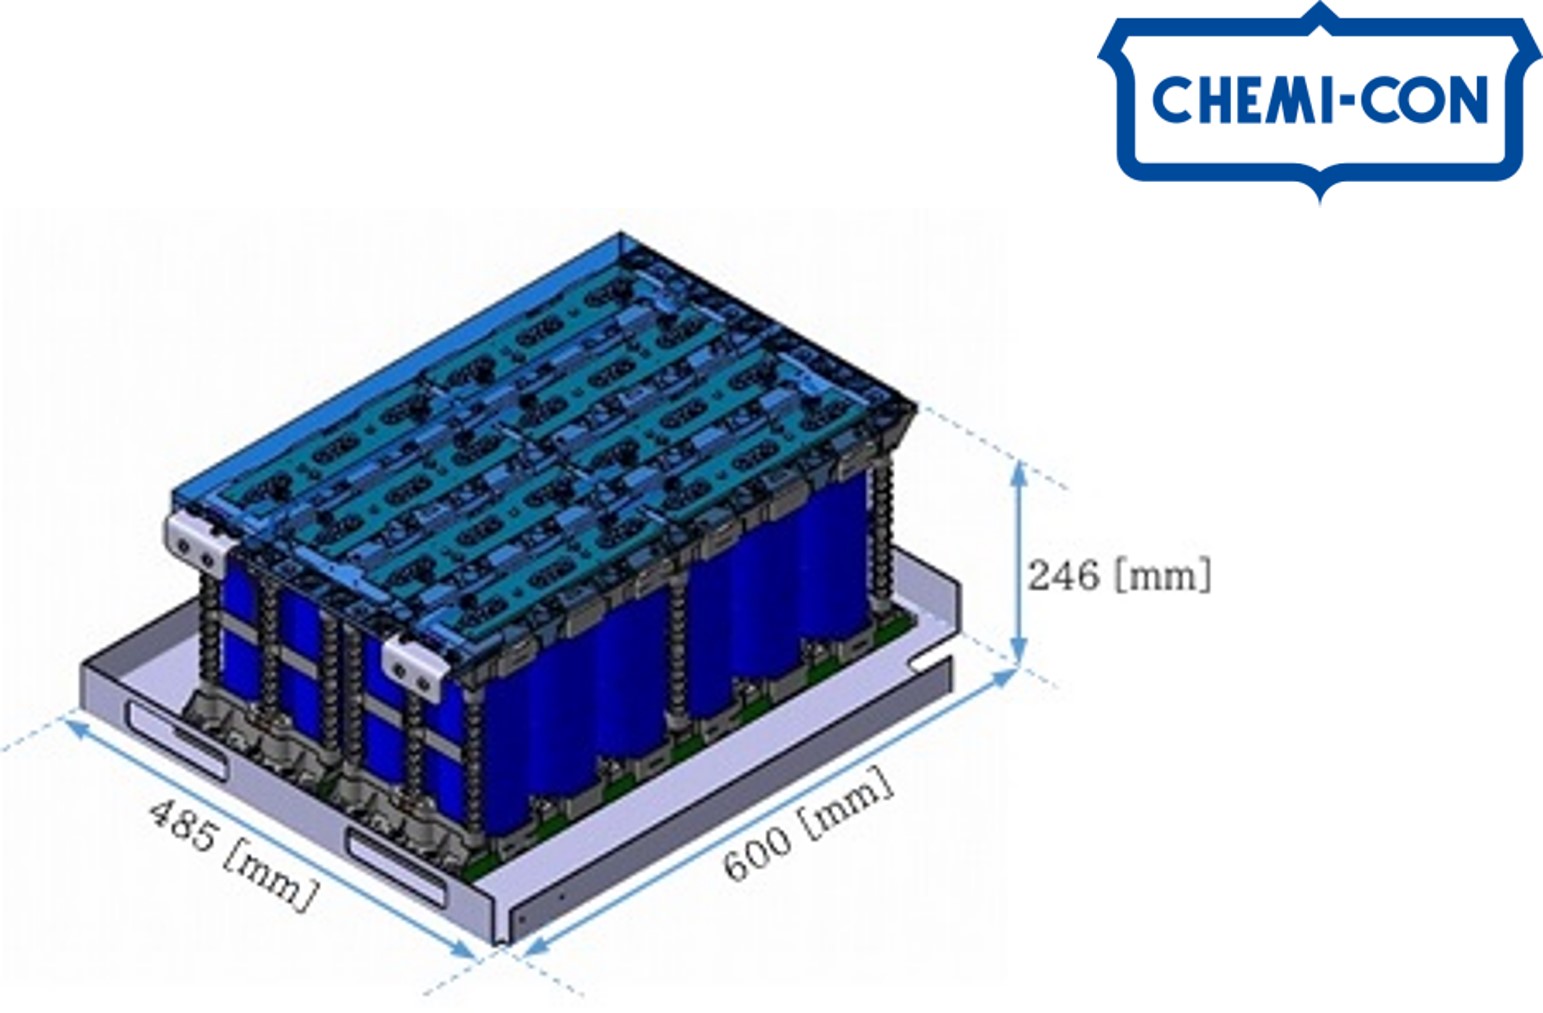 Nippon Chemi-Con Supercapacitor Module for Use in Large-Scale Equipment